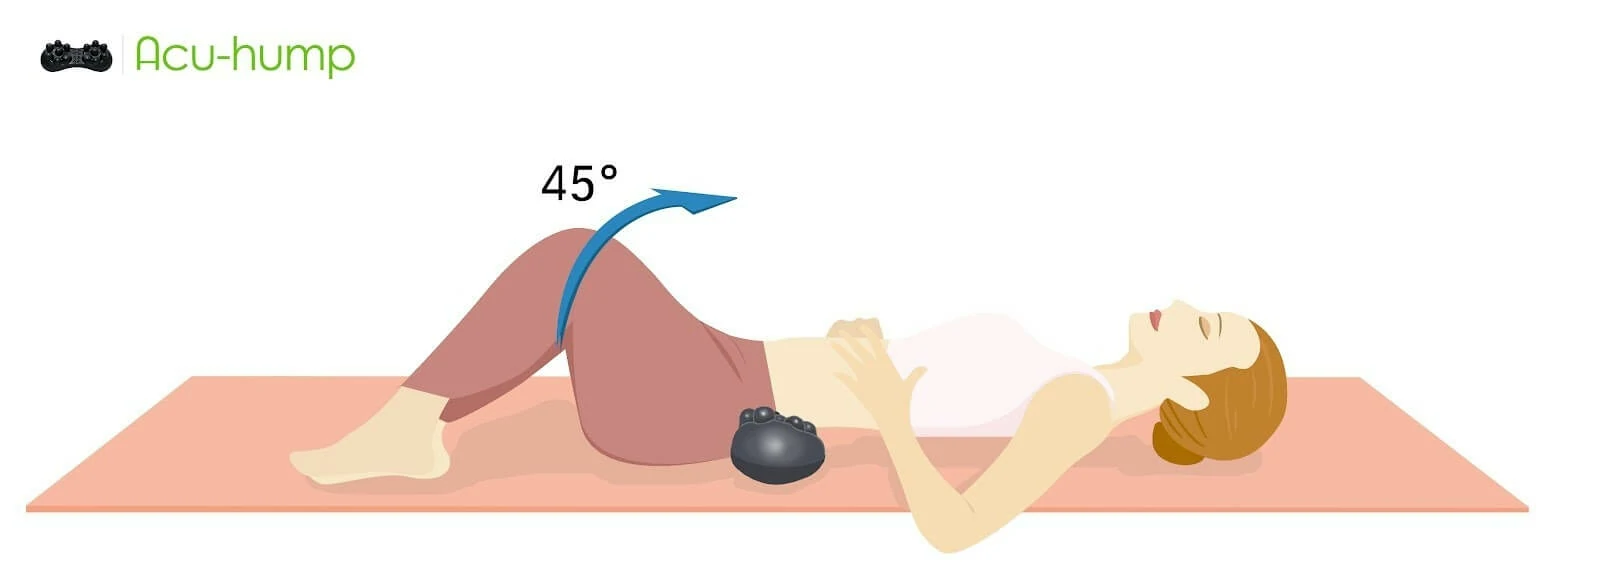 The woman lies on her back and swings her legs to increase the pressure exerted by the Acu-hump under the SI joint and relieve pain